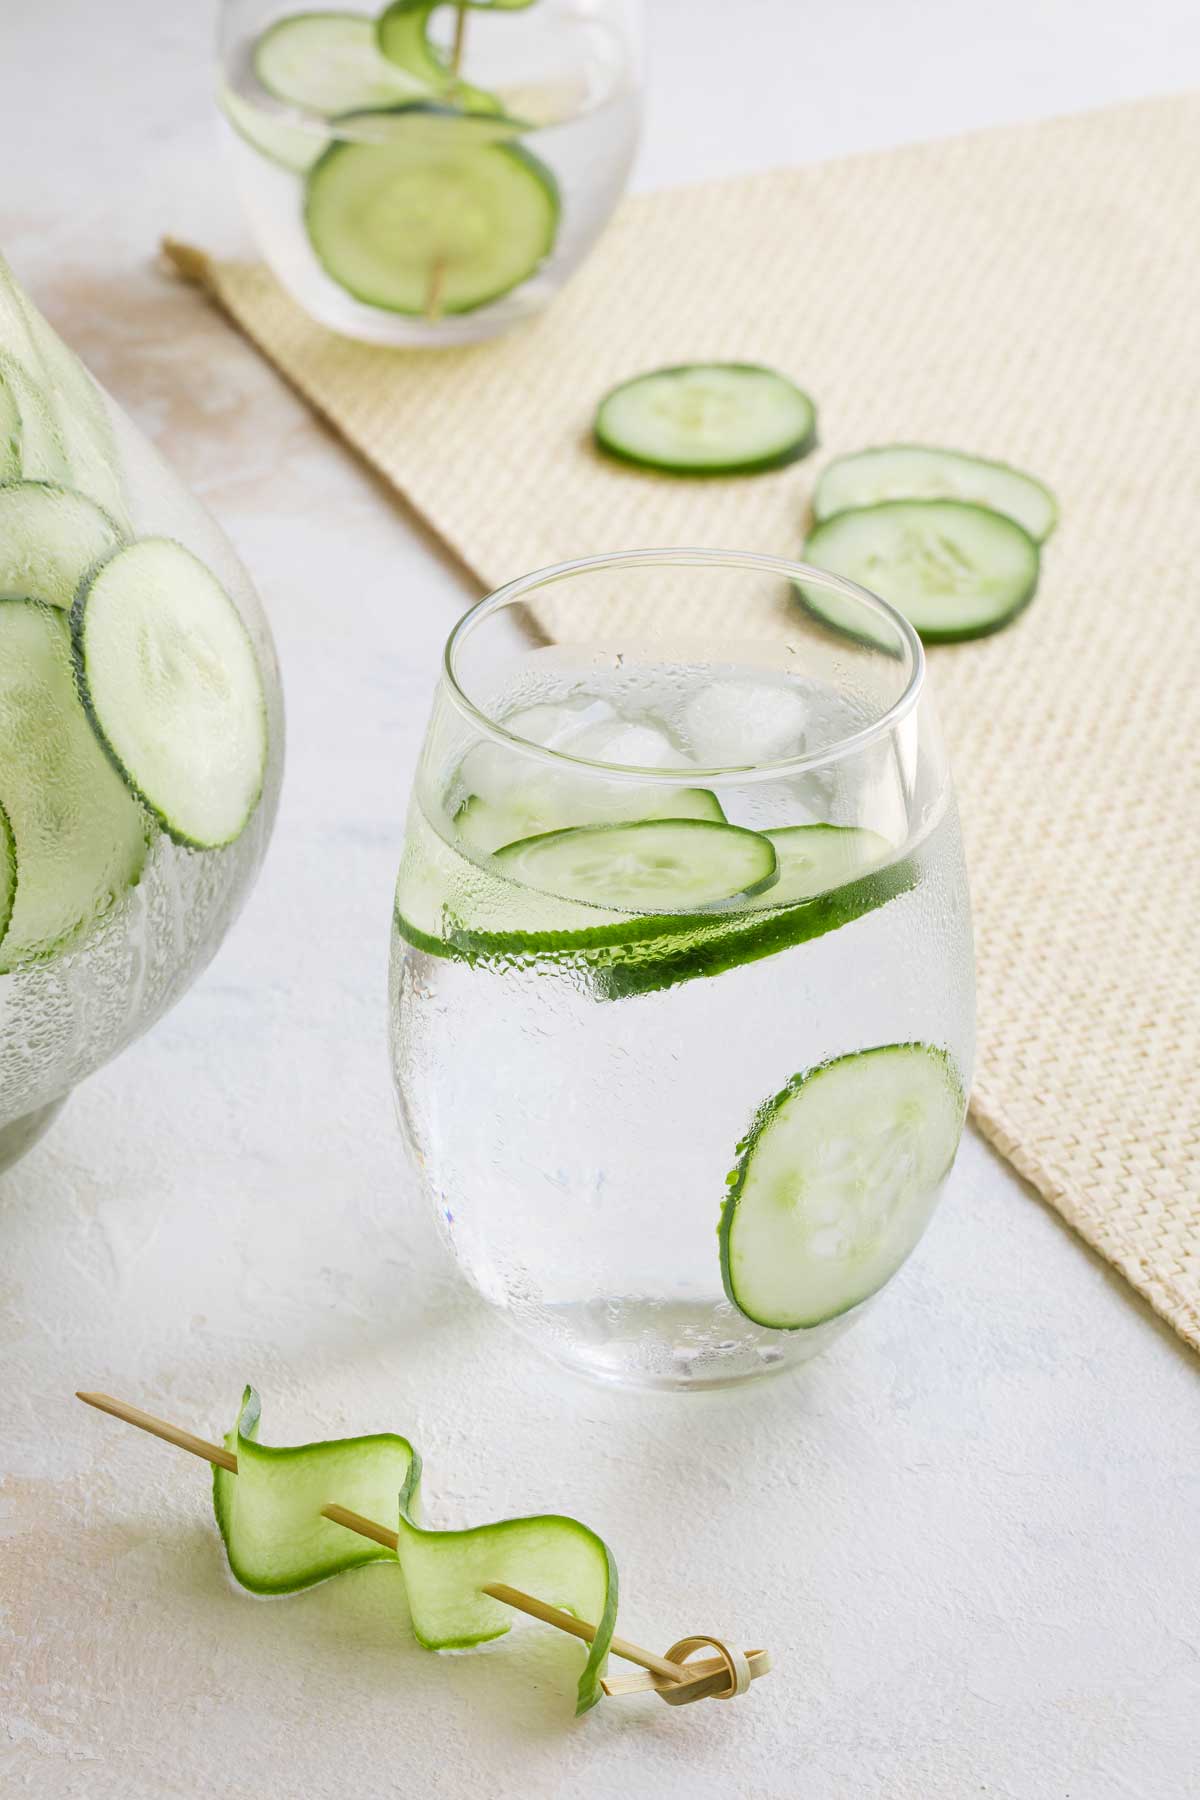 Side shot of one filled glass, with another glass, part of a pitcher, extra cucumber slices and garnish surrounding.